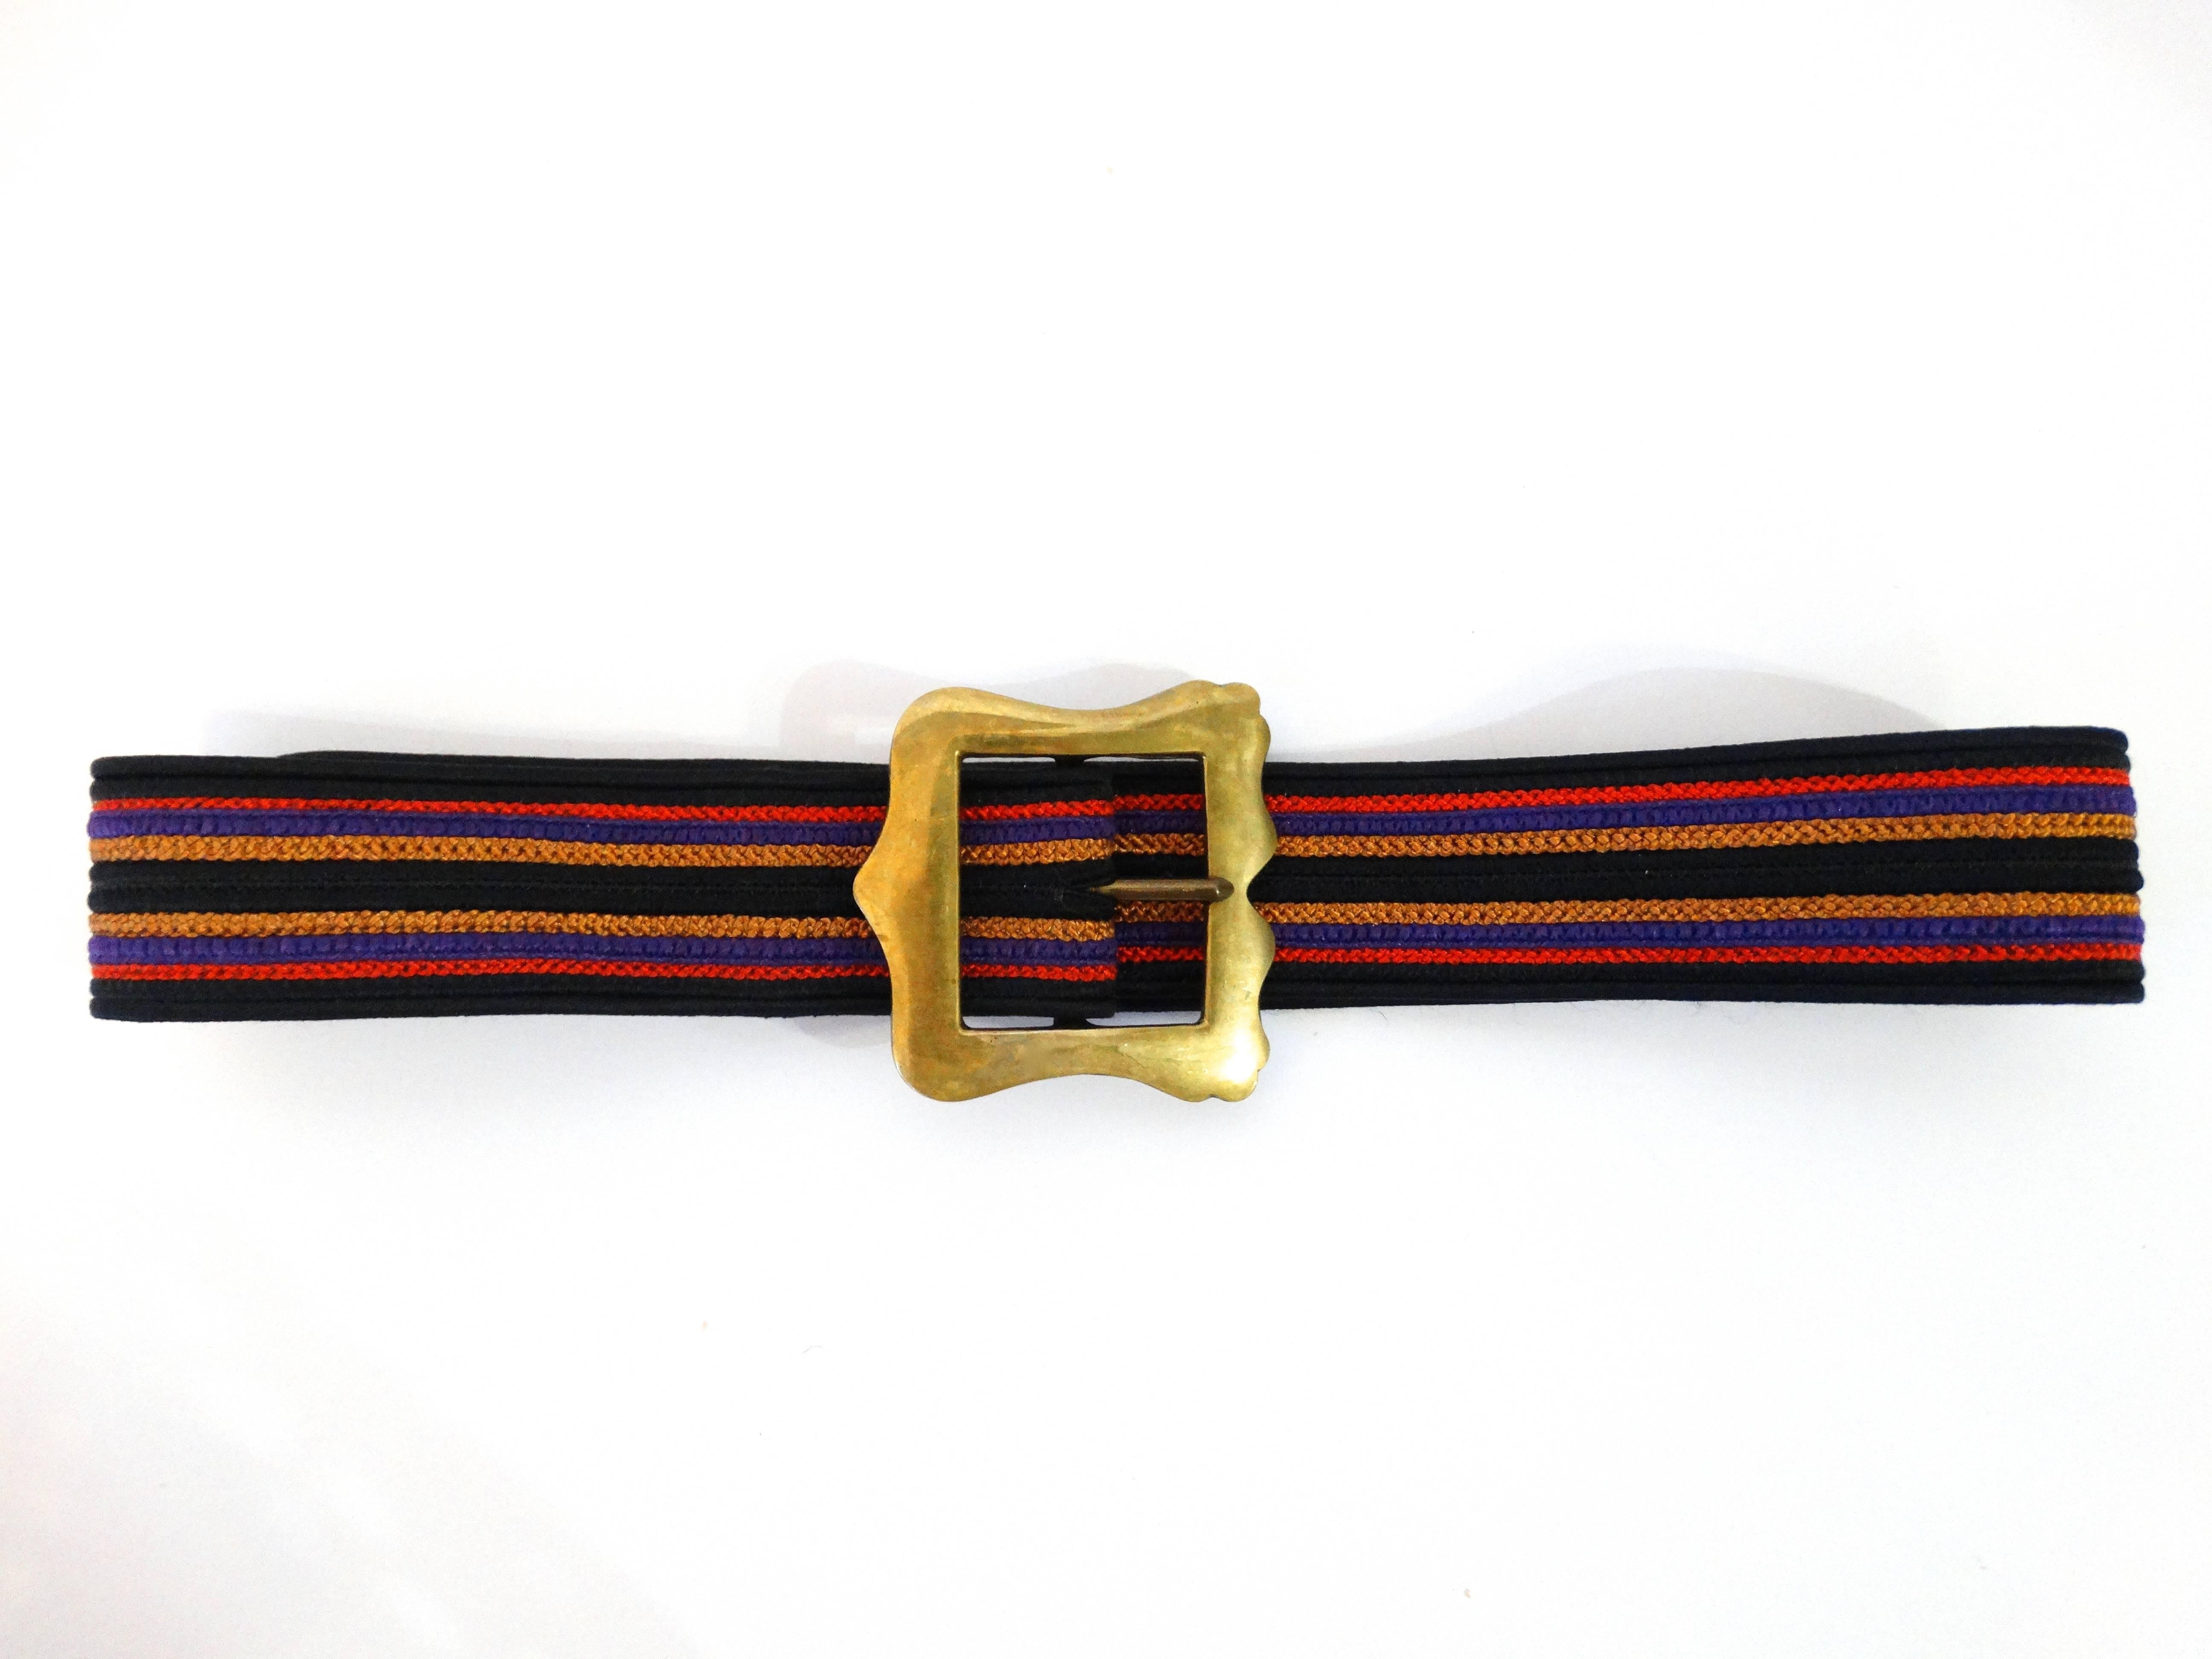 Purple, tan, black and red silk cord belt with large brass buckle. Gold hang tag marked Yves Saint Laurent rive gauche Made in France  
 
Measurements: 
 Width 1.5 inches 
 Belt fits 26 -29 inch waist. 
 May add extra holes to fit smaller if